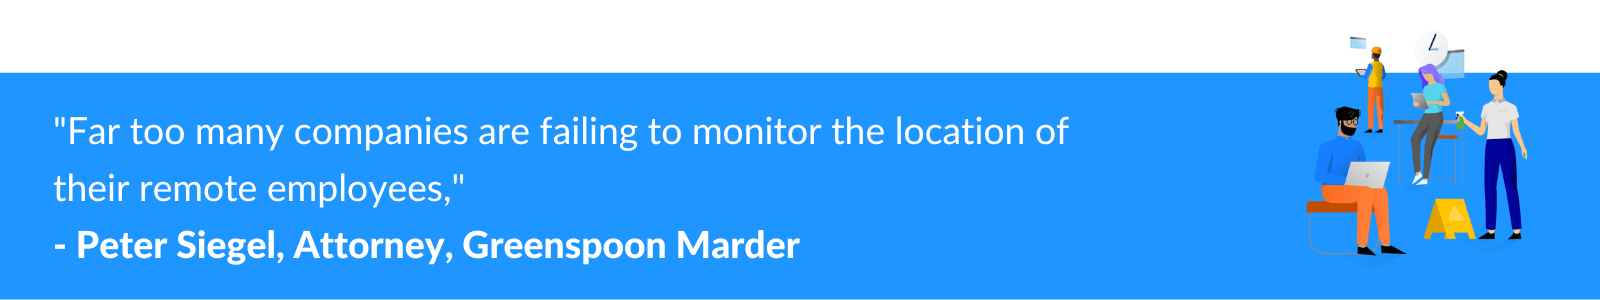 "Far too many companies are failing to monitor the location of their remote employees," – Peter Siegel, Attorney, Greenspoon Marder